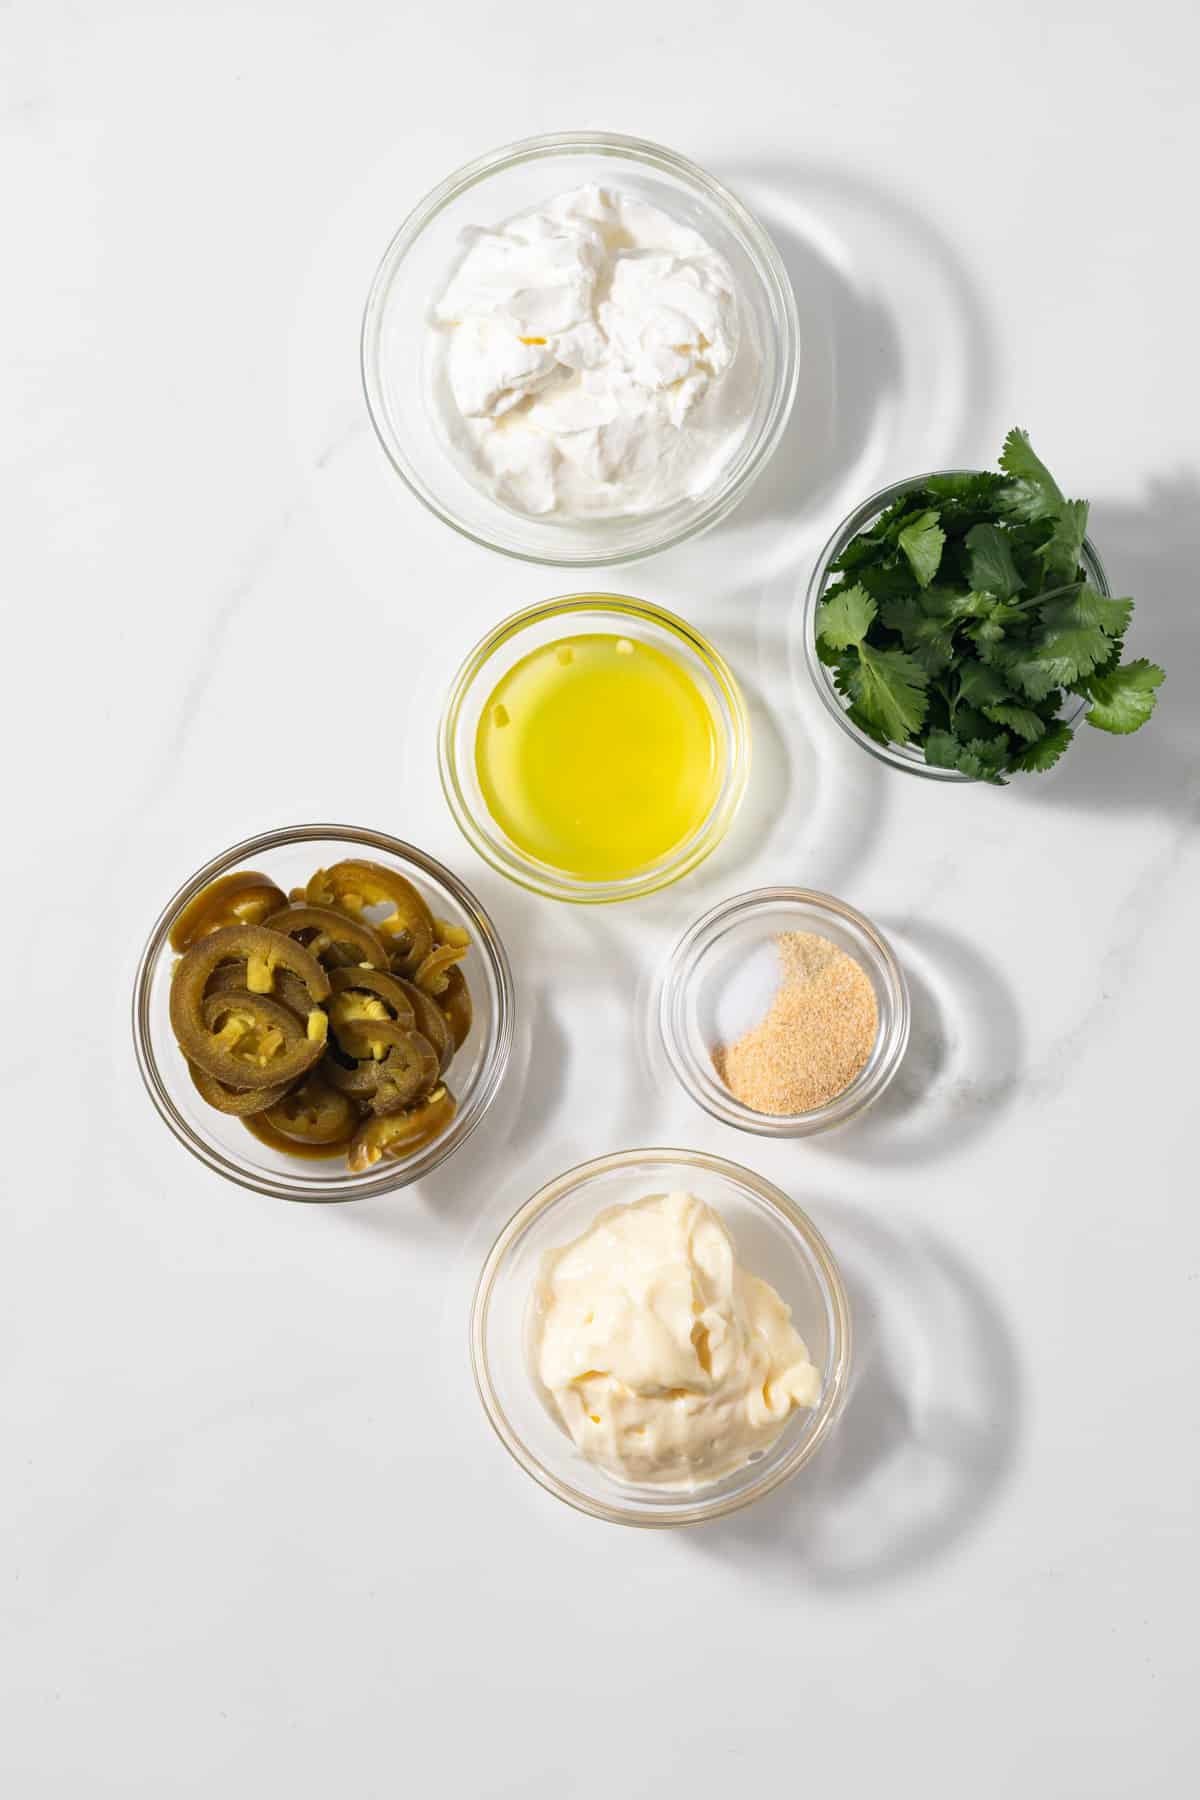 Ingredients for creamy jalapeno sauce in glass bowls.